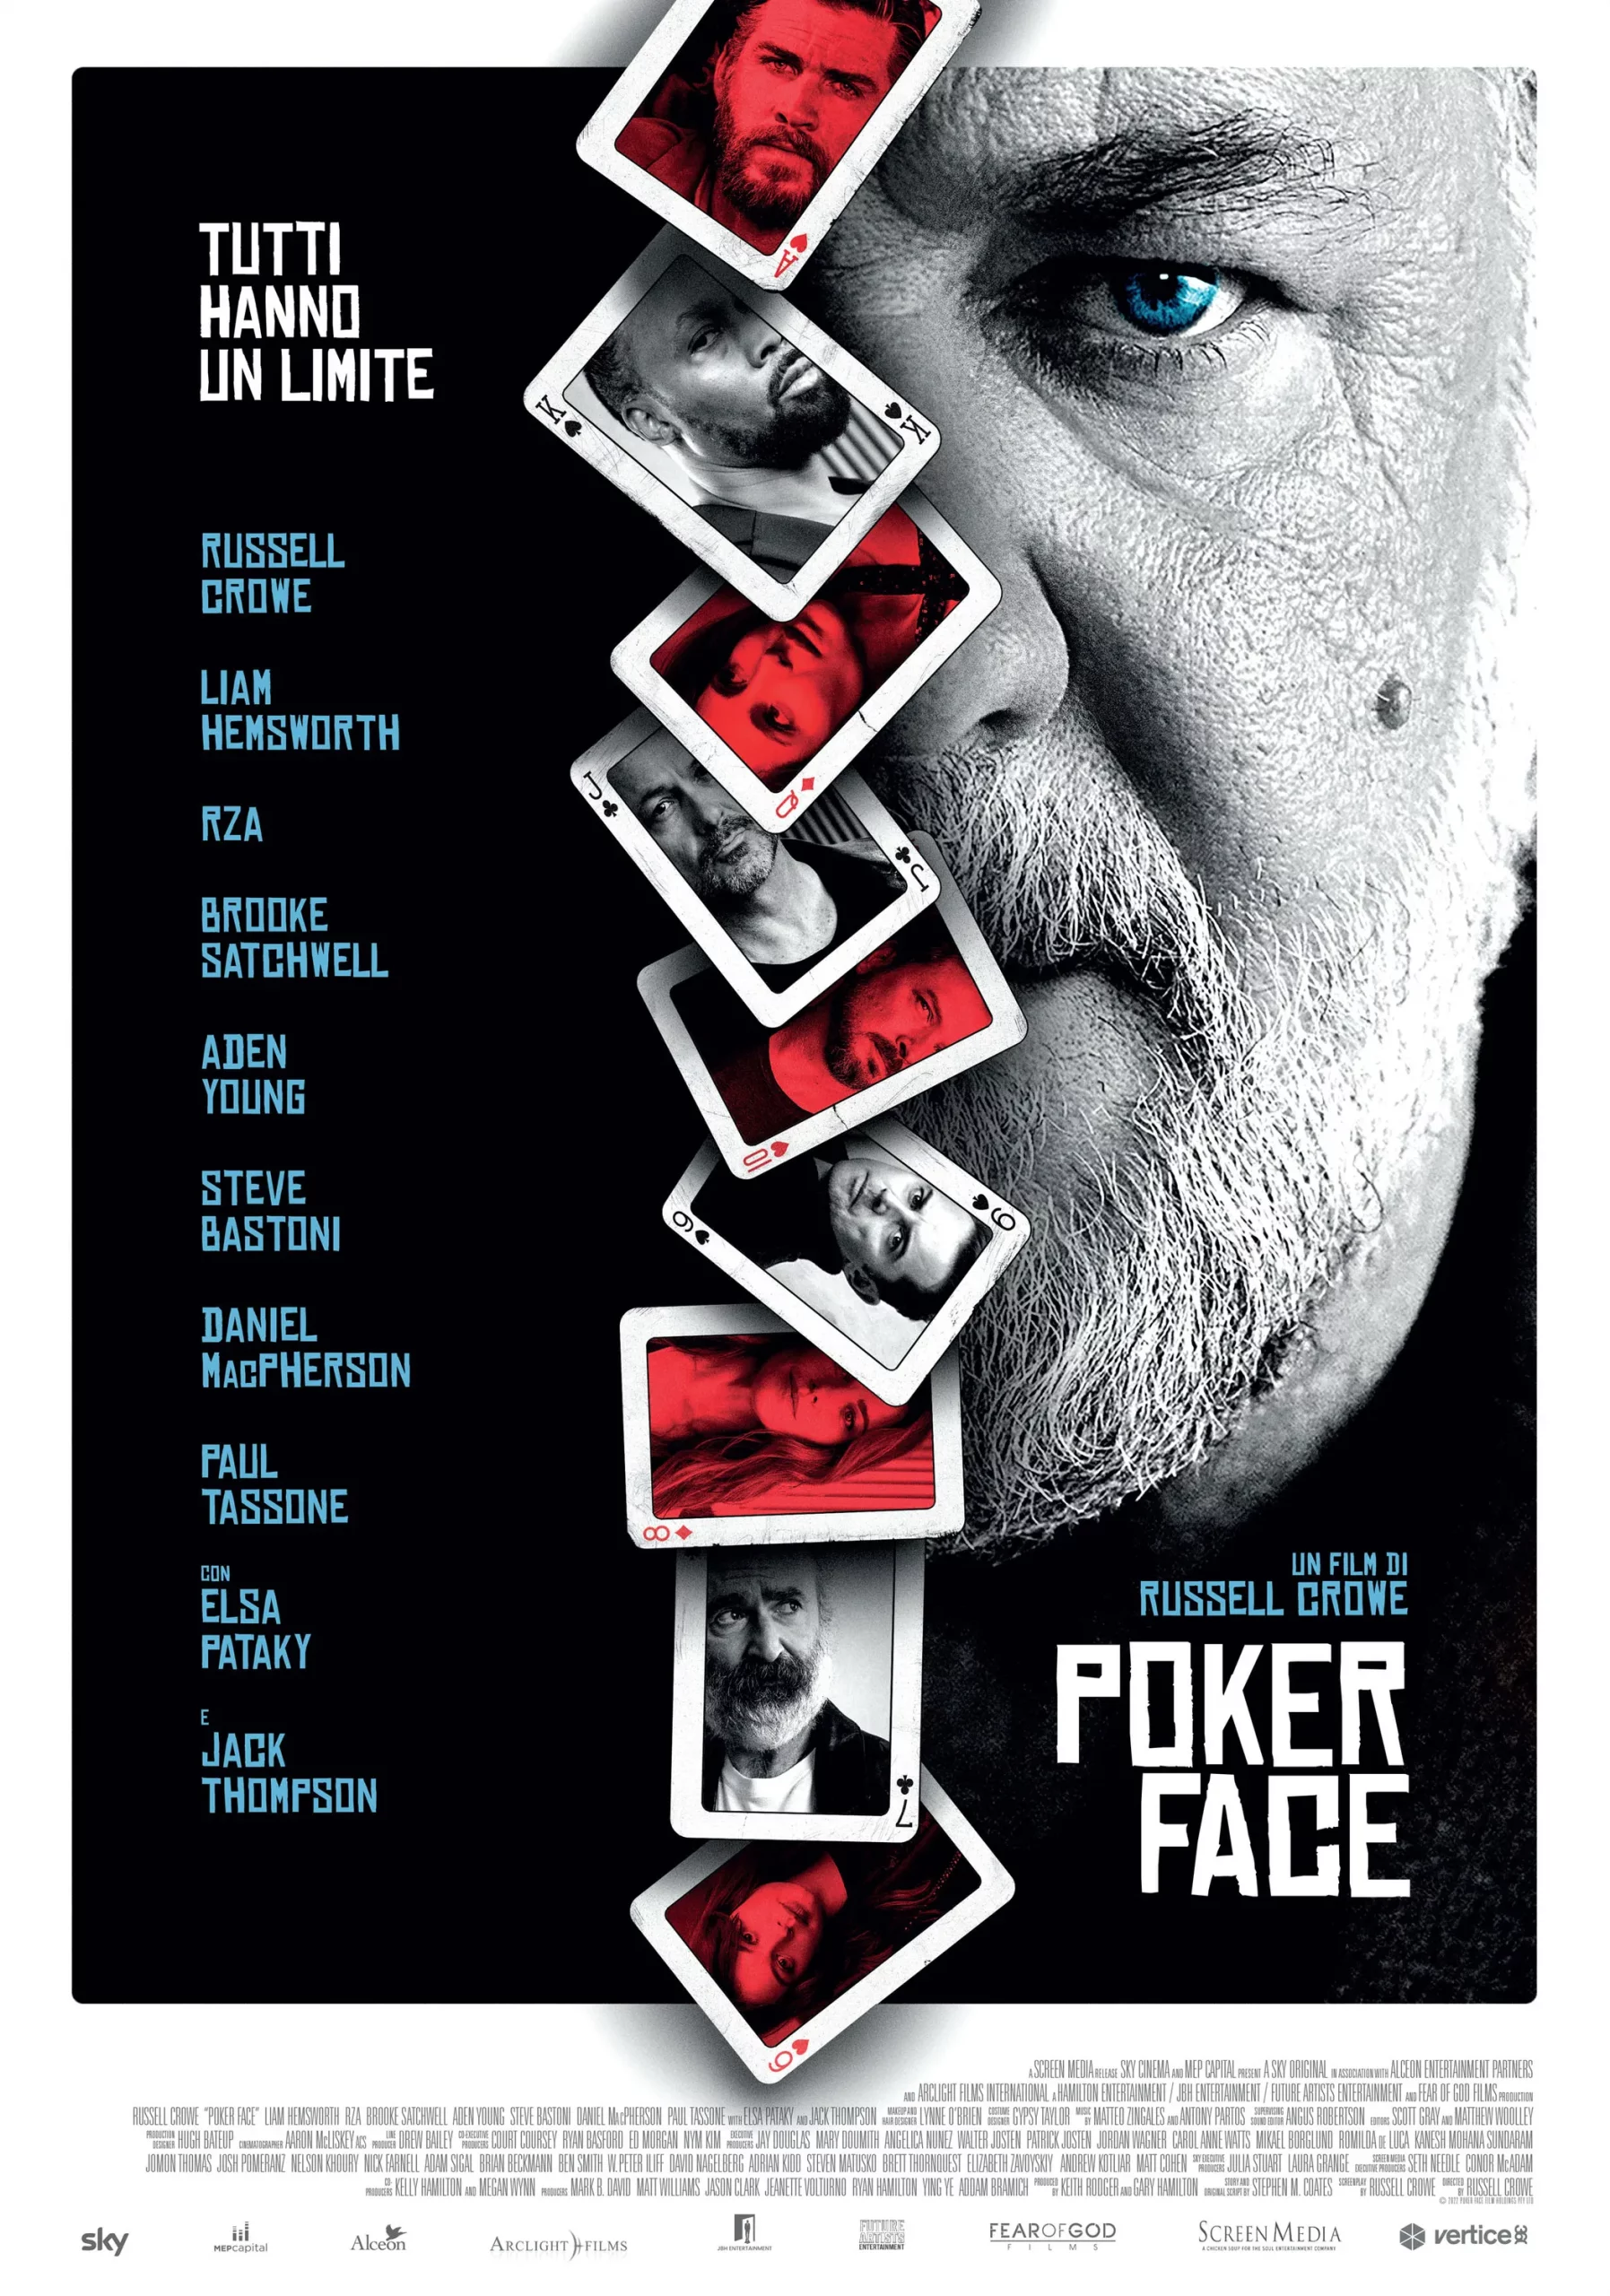 Thriller "Poker Face‎" Directed and Starred by Russell Crowe Reveals Trailer | FMV6